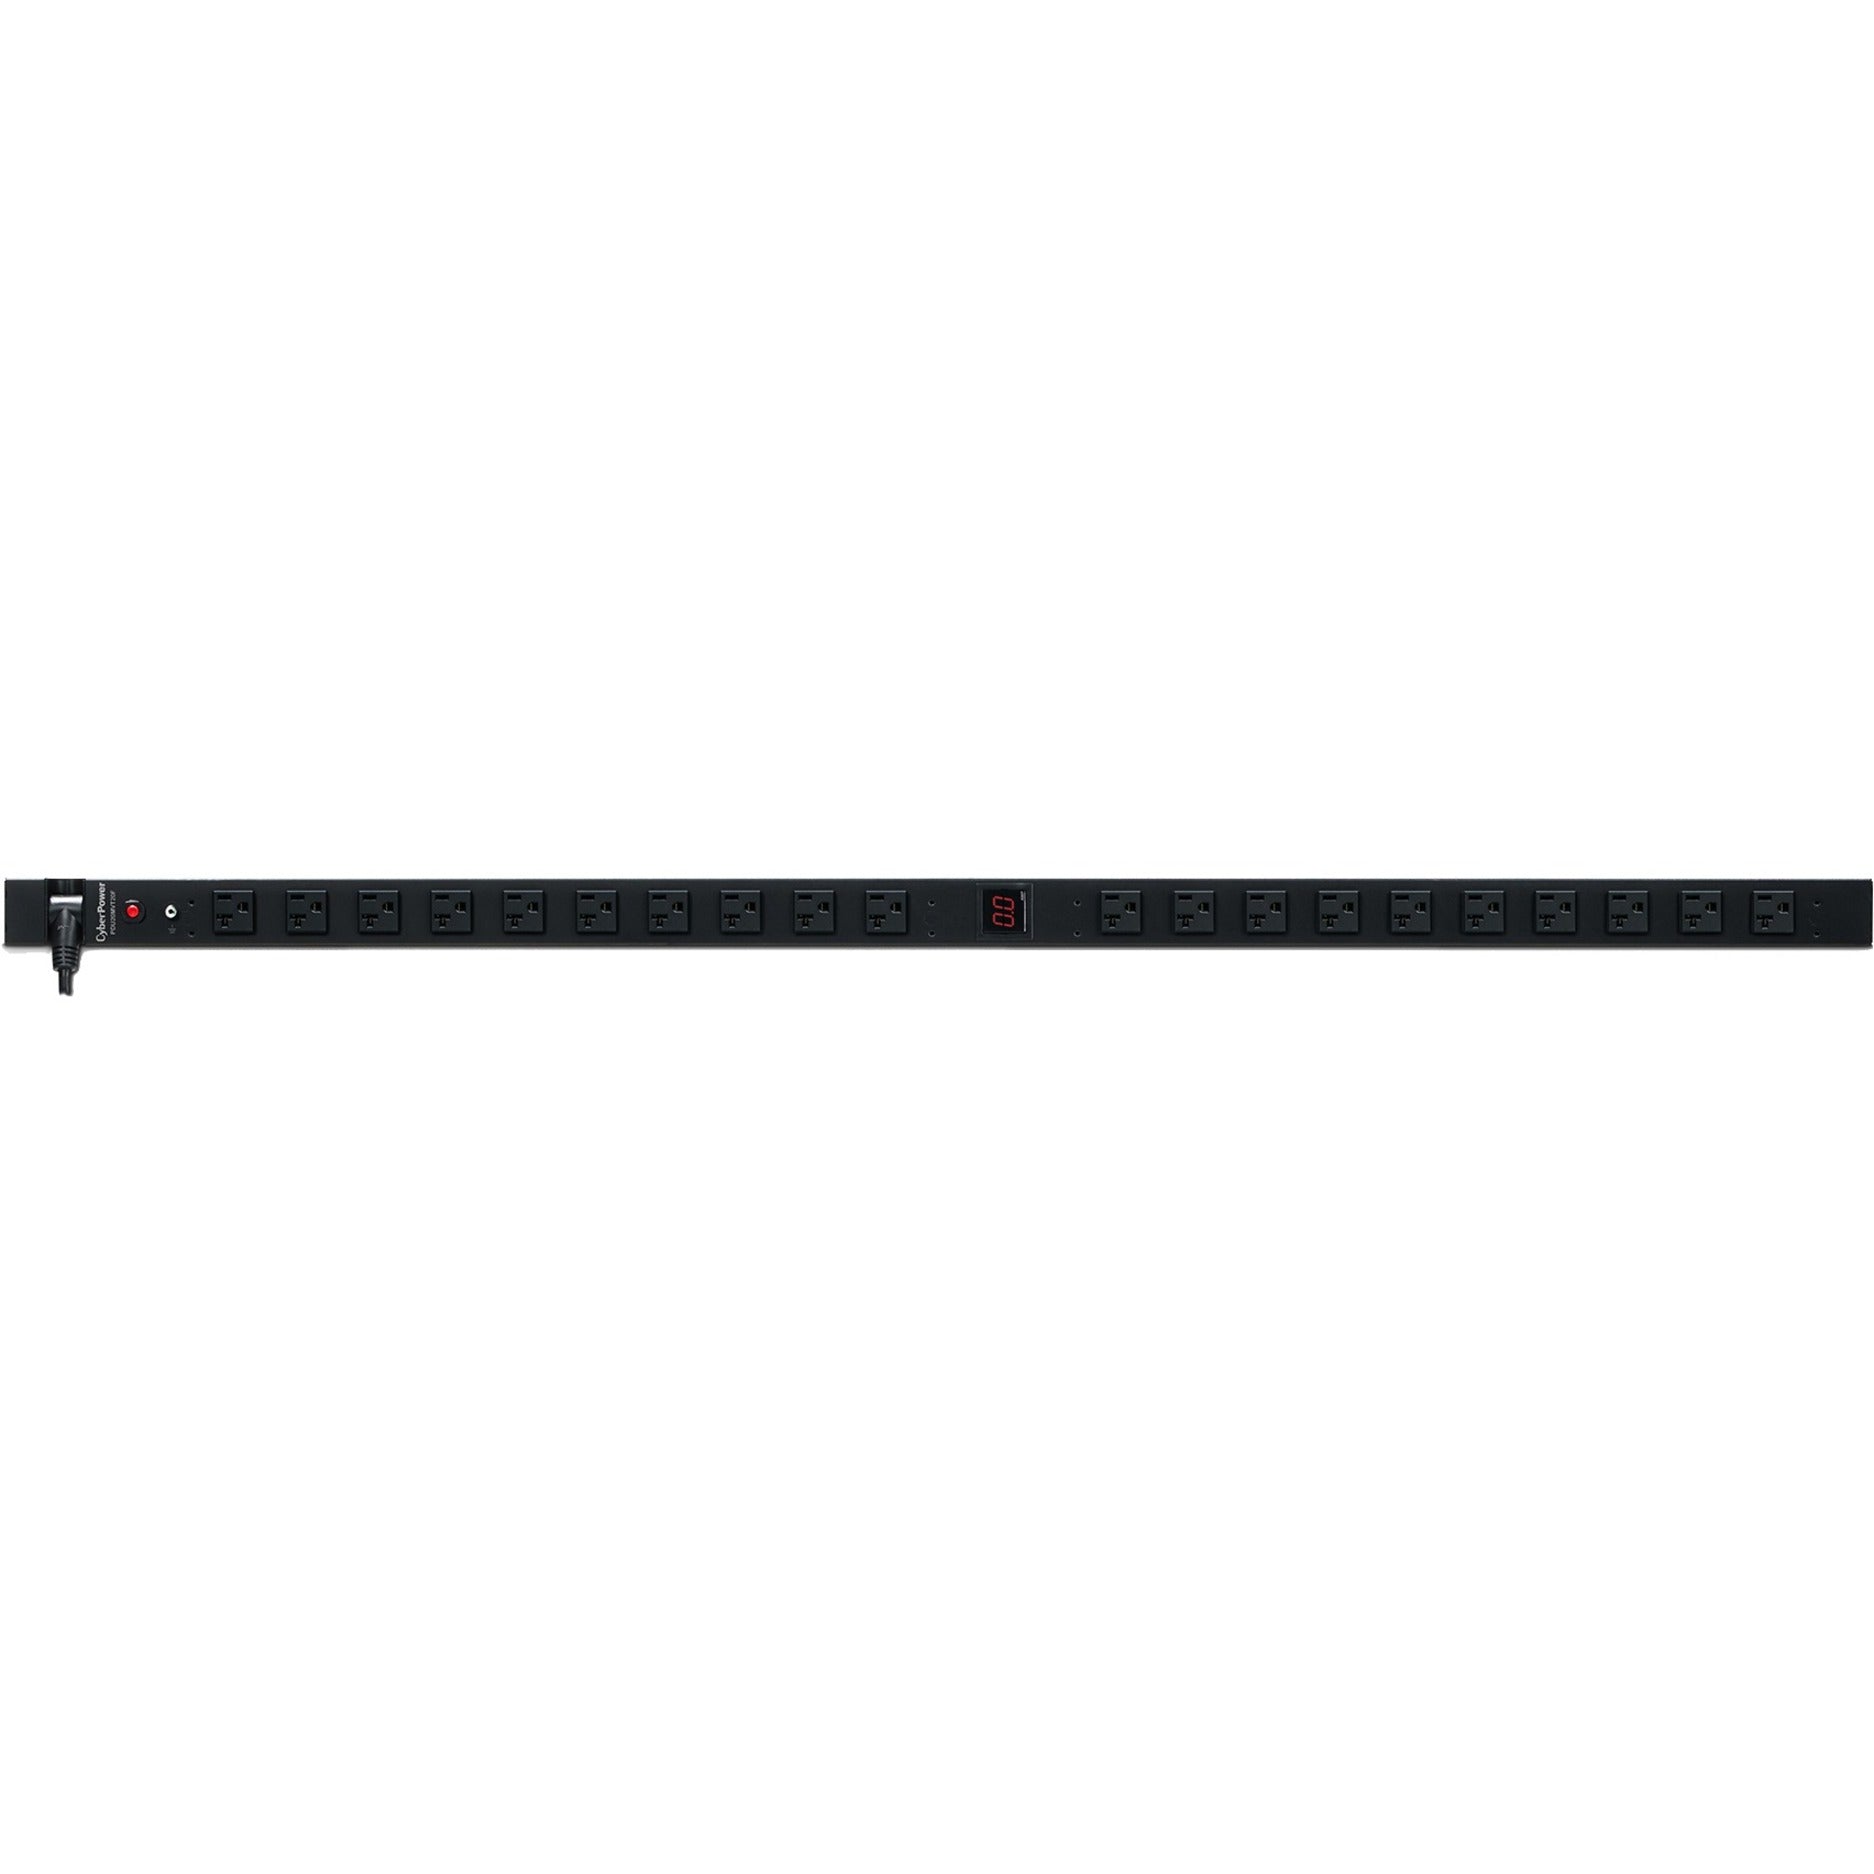 CyberPower PDU20MVT20F Metered PDU, 20-Outlets, 100-125V, 20A, Rack-mountable